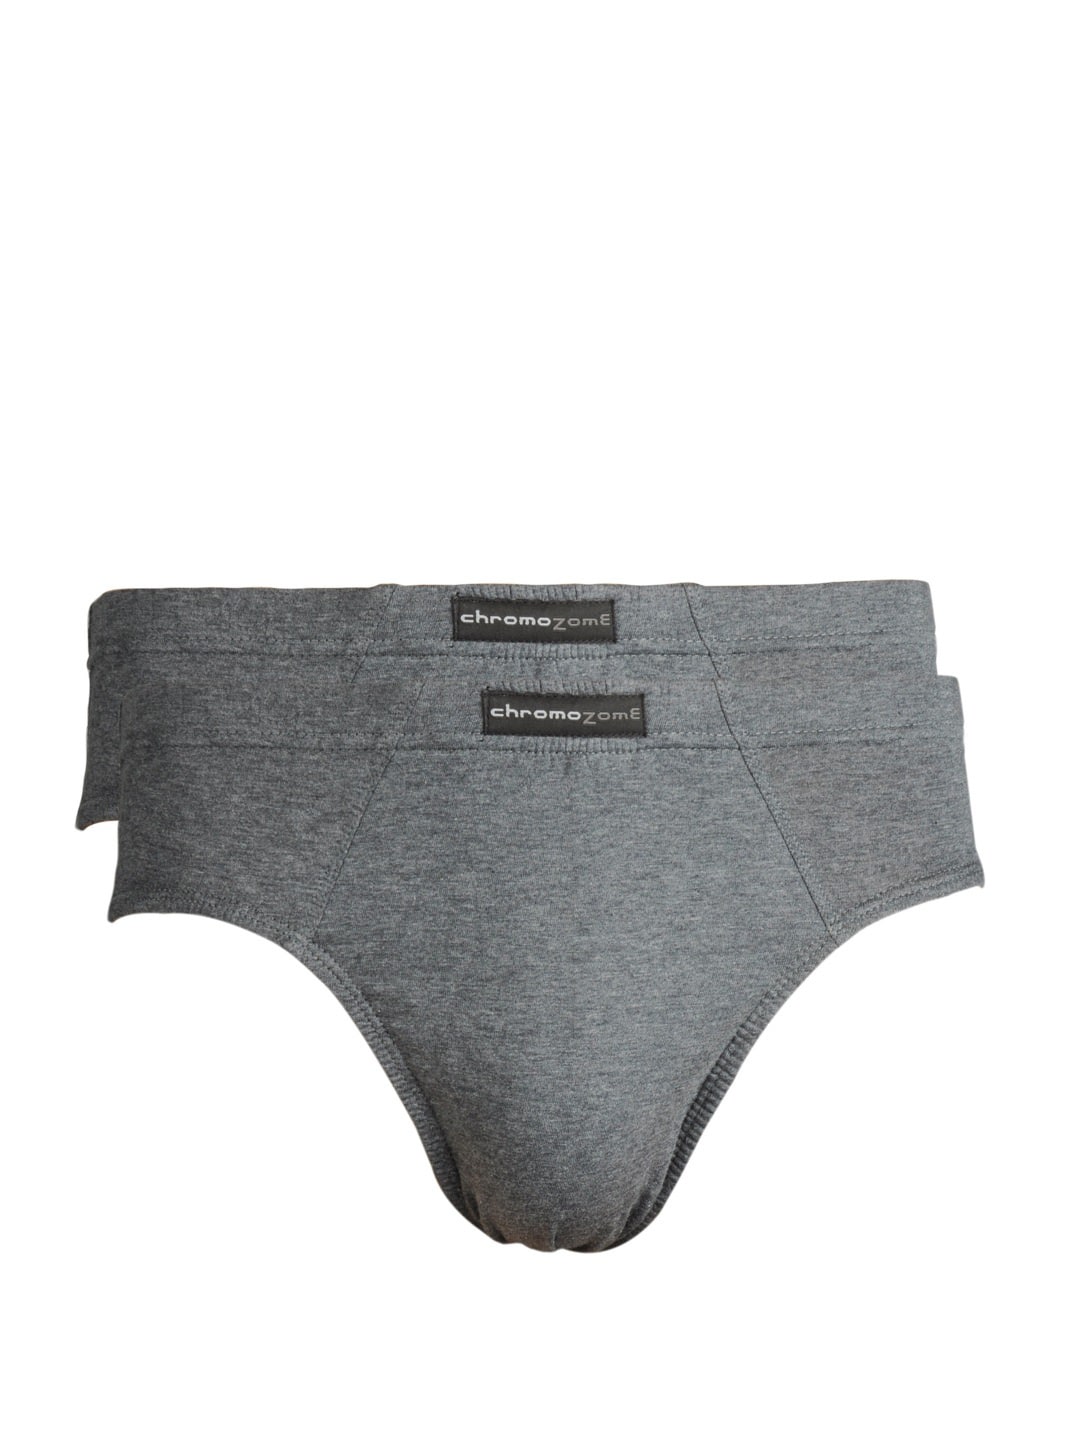 Chromozome Men Charcoal Pack of 2 Briefs